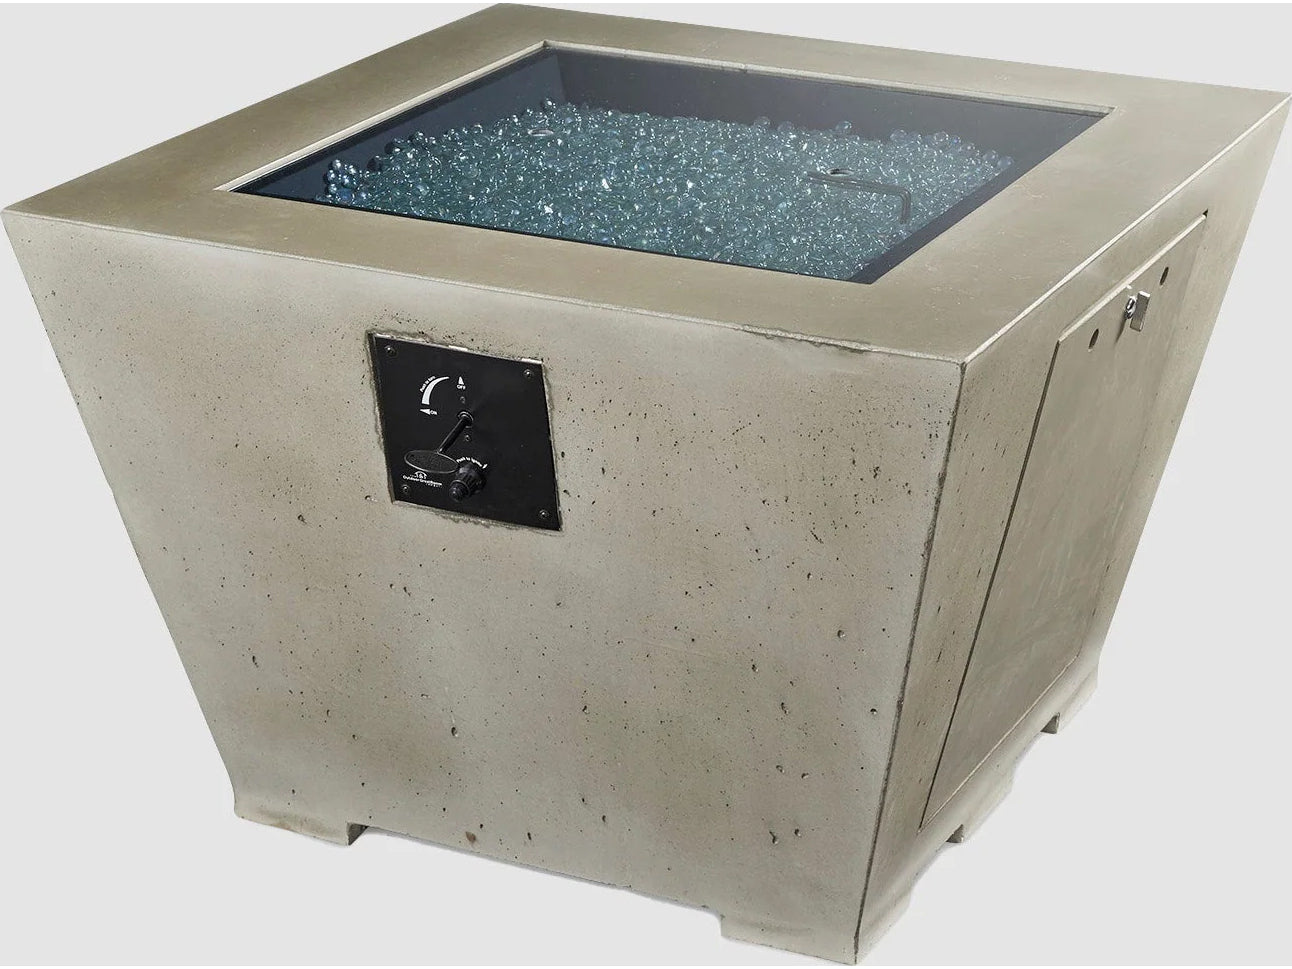 Outdoor Greatroom - 37’’ Wide - Cove Super Cast Concrete Fire Pit Bowl - Natural Grey - Direct Spark Ignition